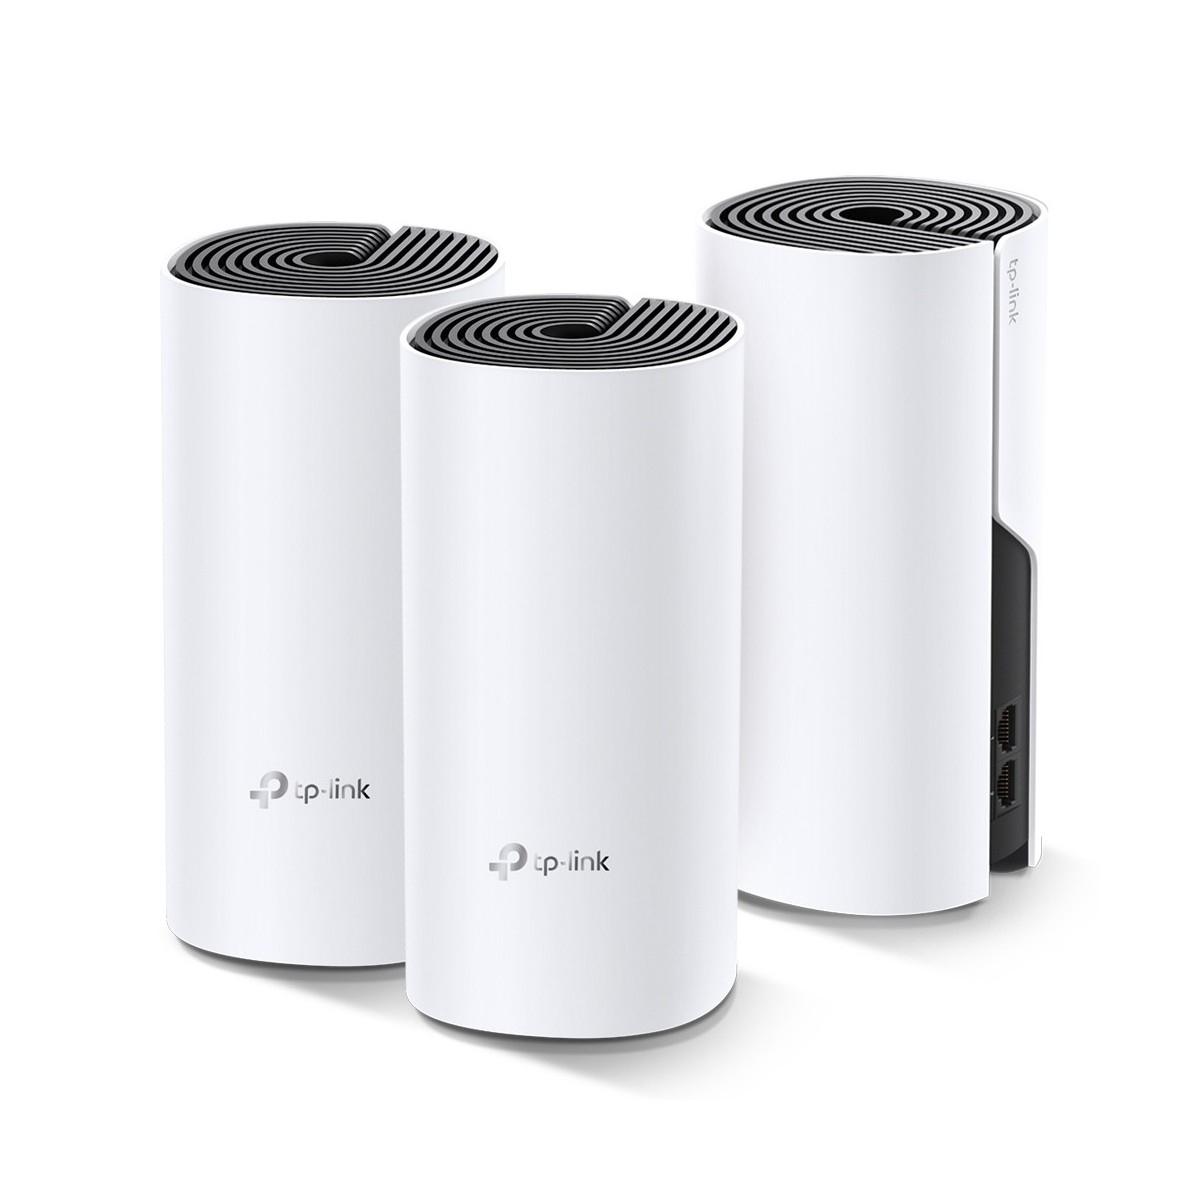 TP-LINK Deco M4(3-pack) - Wi-Fi 5 (802.11ac) - Dual-band (2.4 GHz / 5 GHz) - Ethernet LAN - Black,White - Tabletop router